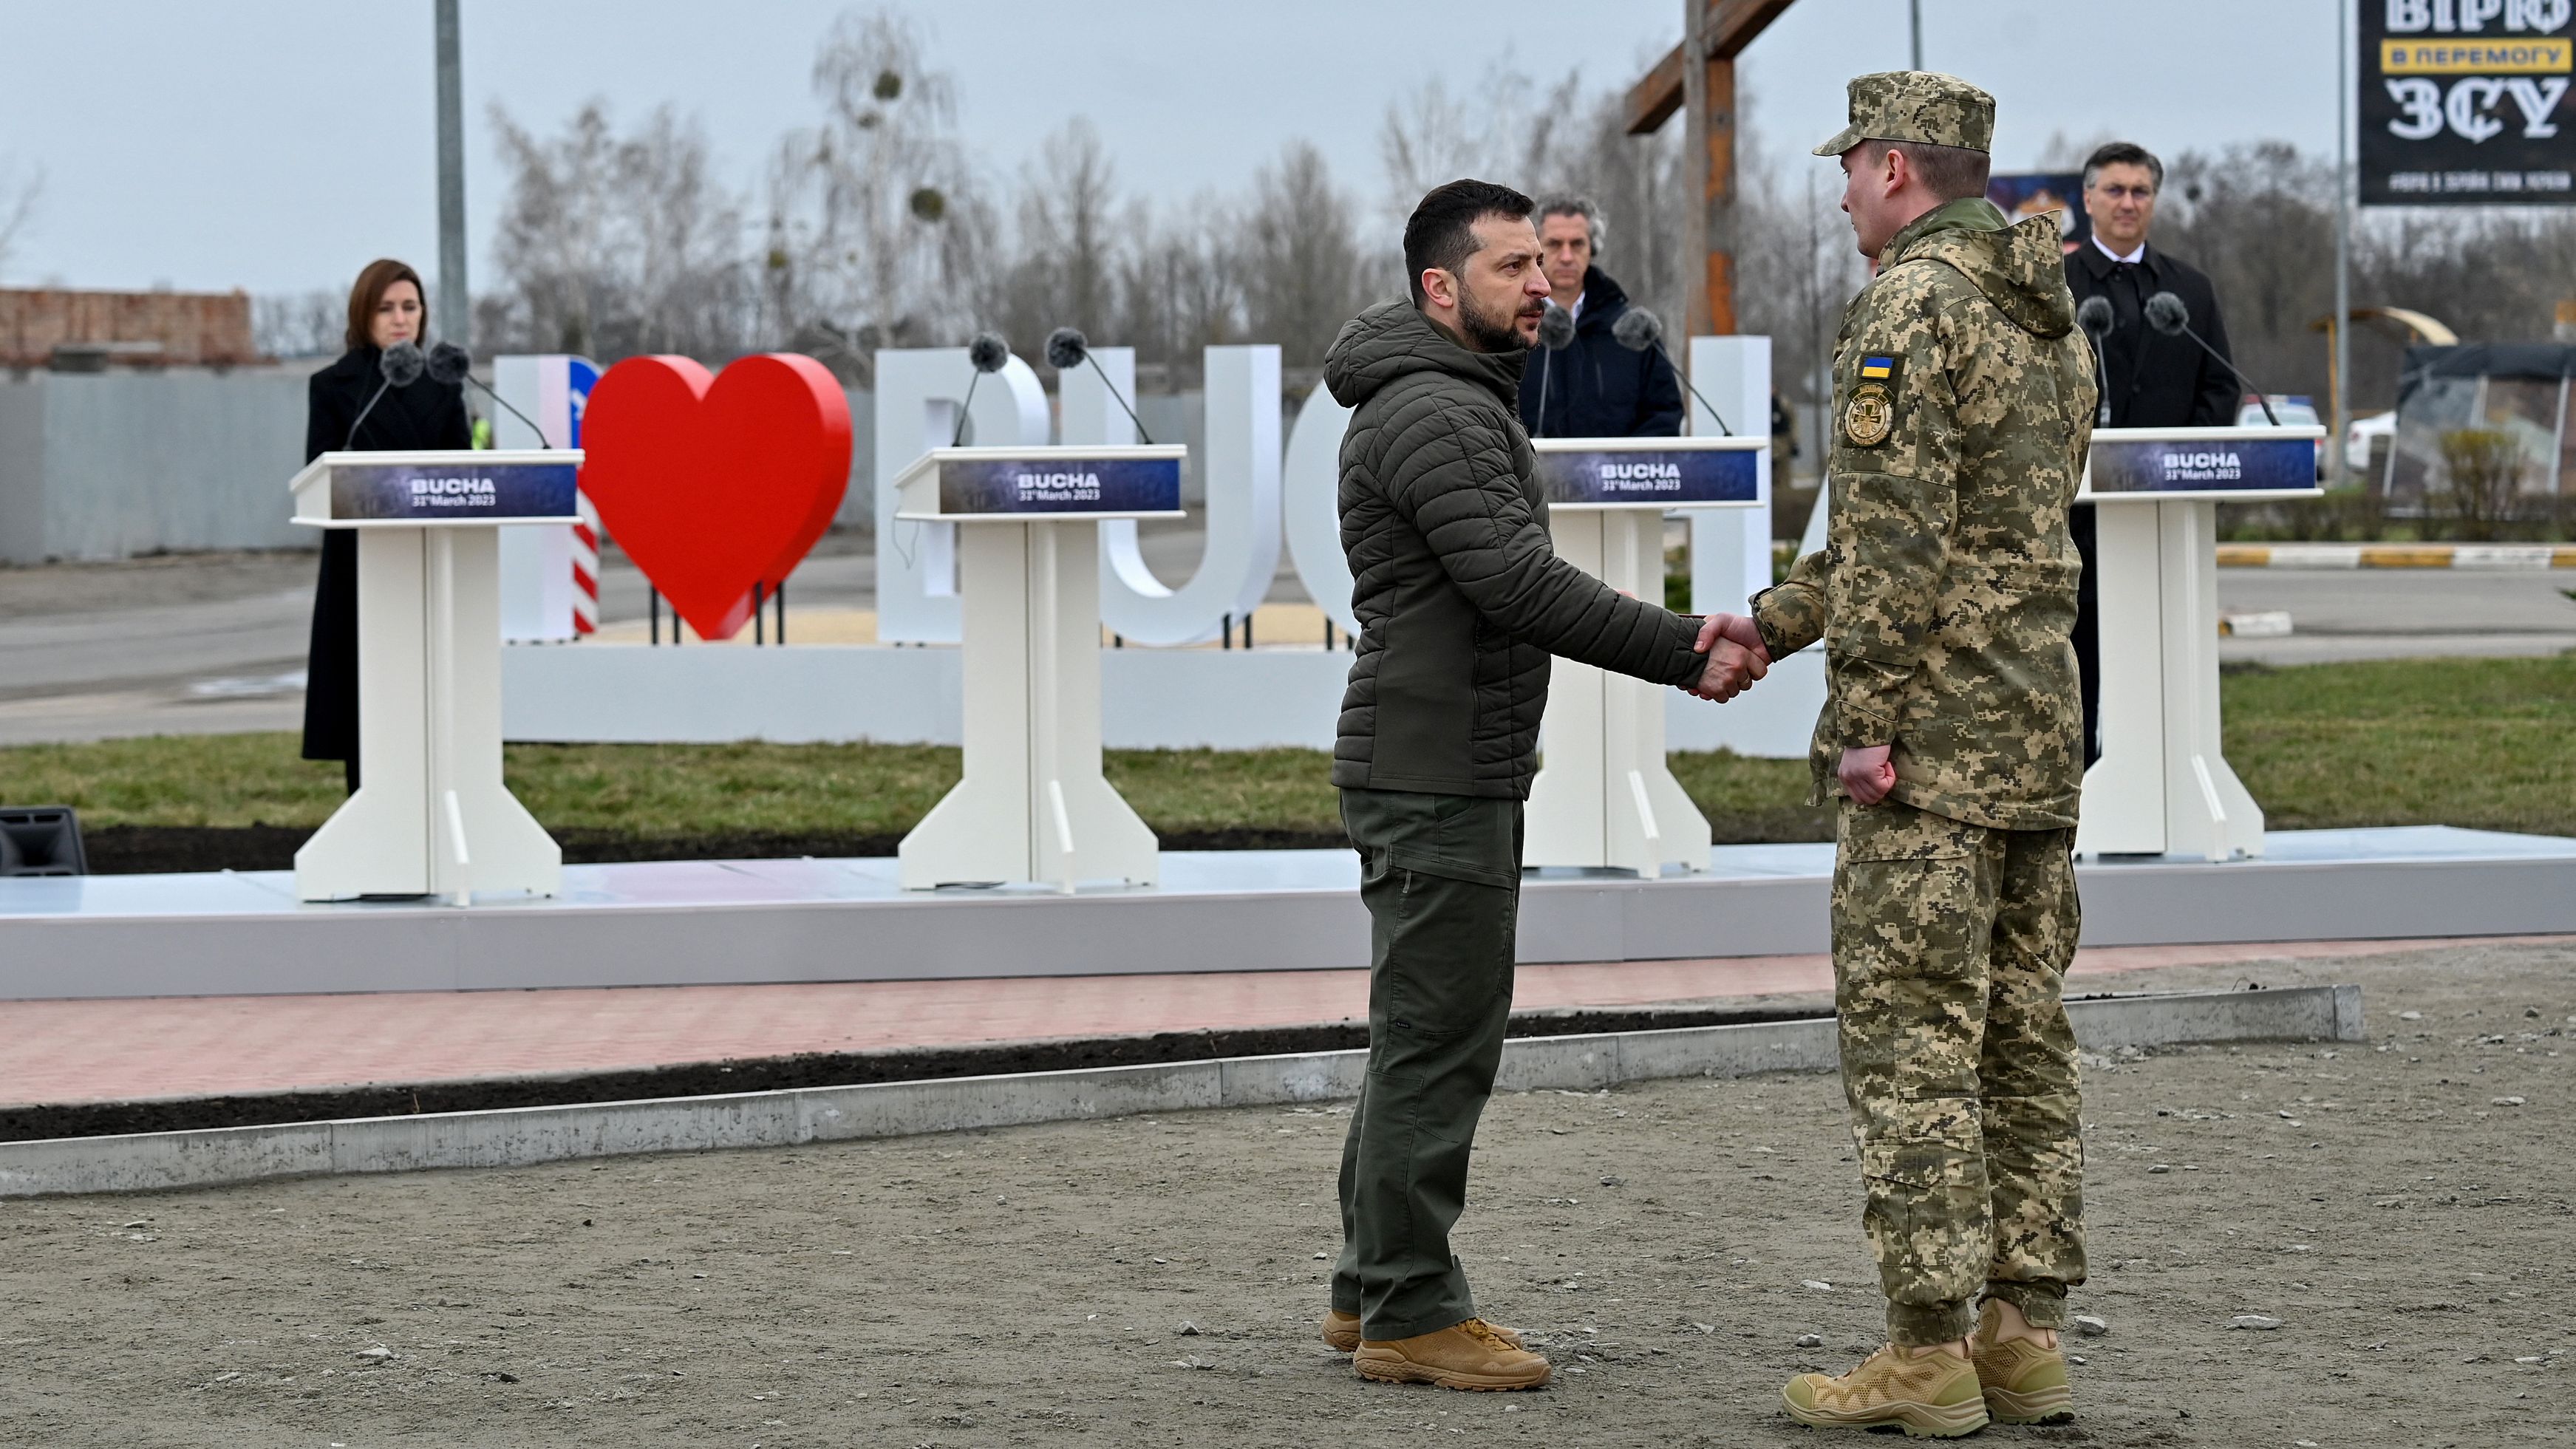 Ukraine President Volodymyr Zelenskyy visited Bucha for a ceremony marking the first anniversary of the Russian retreat./ Sergei Supinsky/AFP